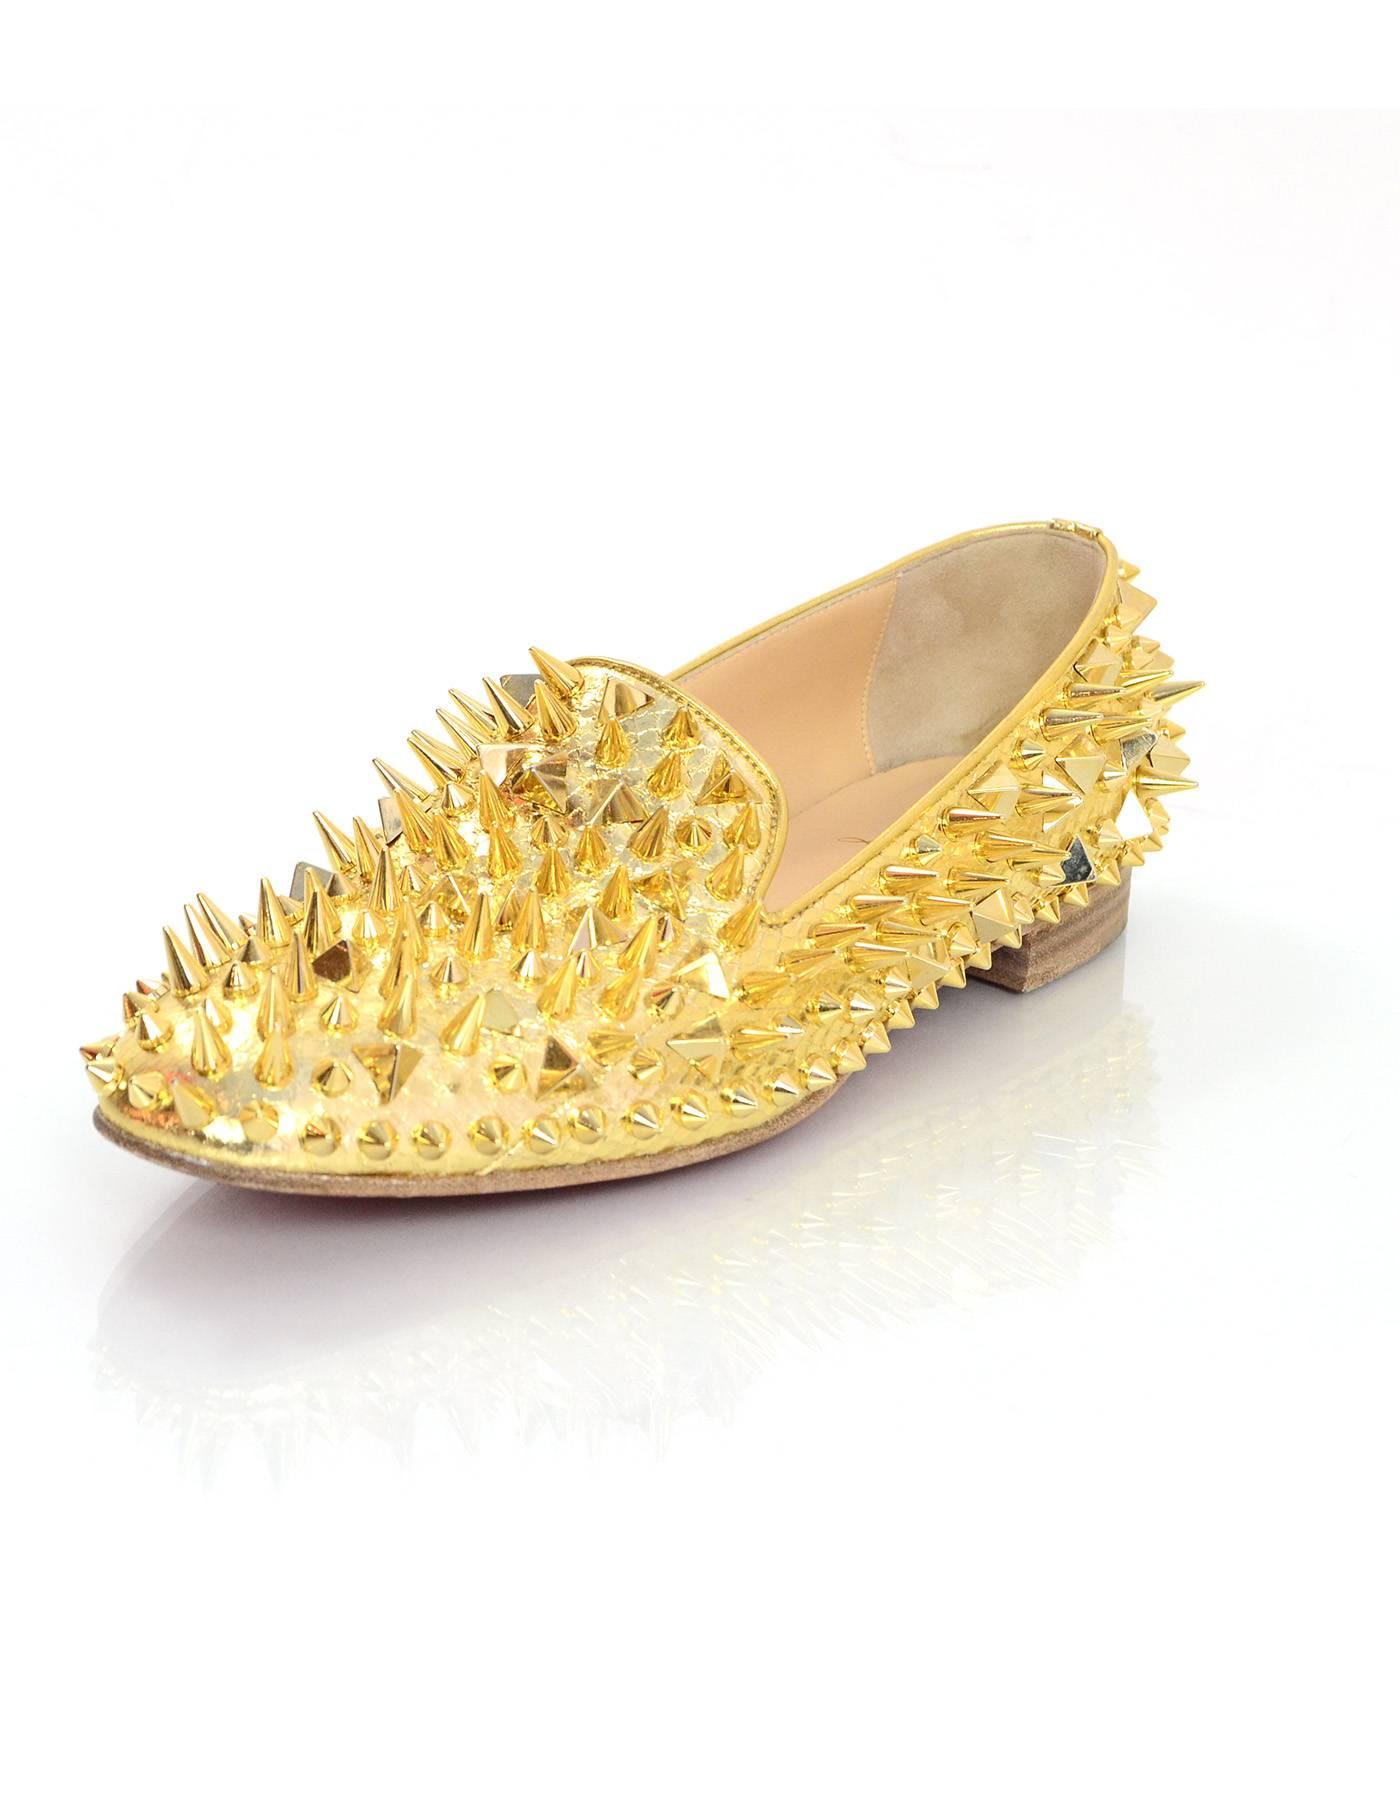 Christian Louboutin Gold Spiked Loafers Sz 38.5

Made In: Italy
Color: Gold
Materials: Snakeskin, spikes
Closure/Opening: Slide on
Sole Stamp: Christian Louboutin Made in Italy 38.5
Overall Condition: Excellent pre-owned condition with the exception